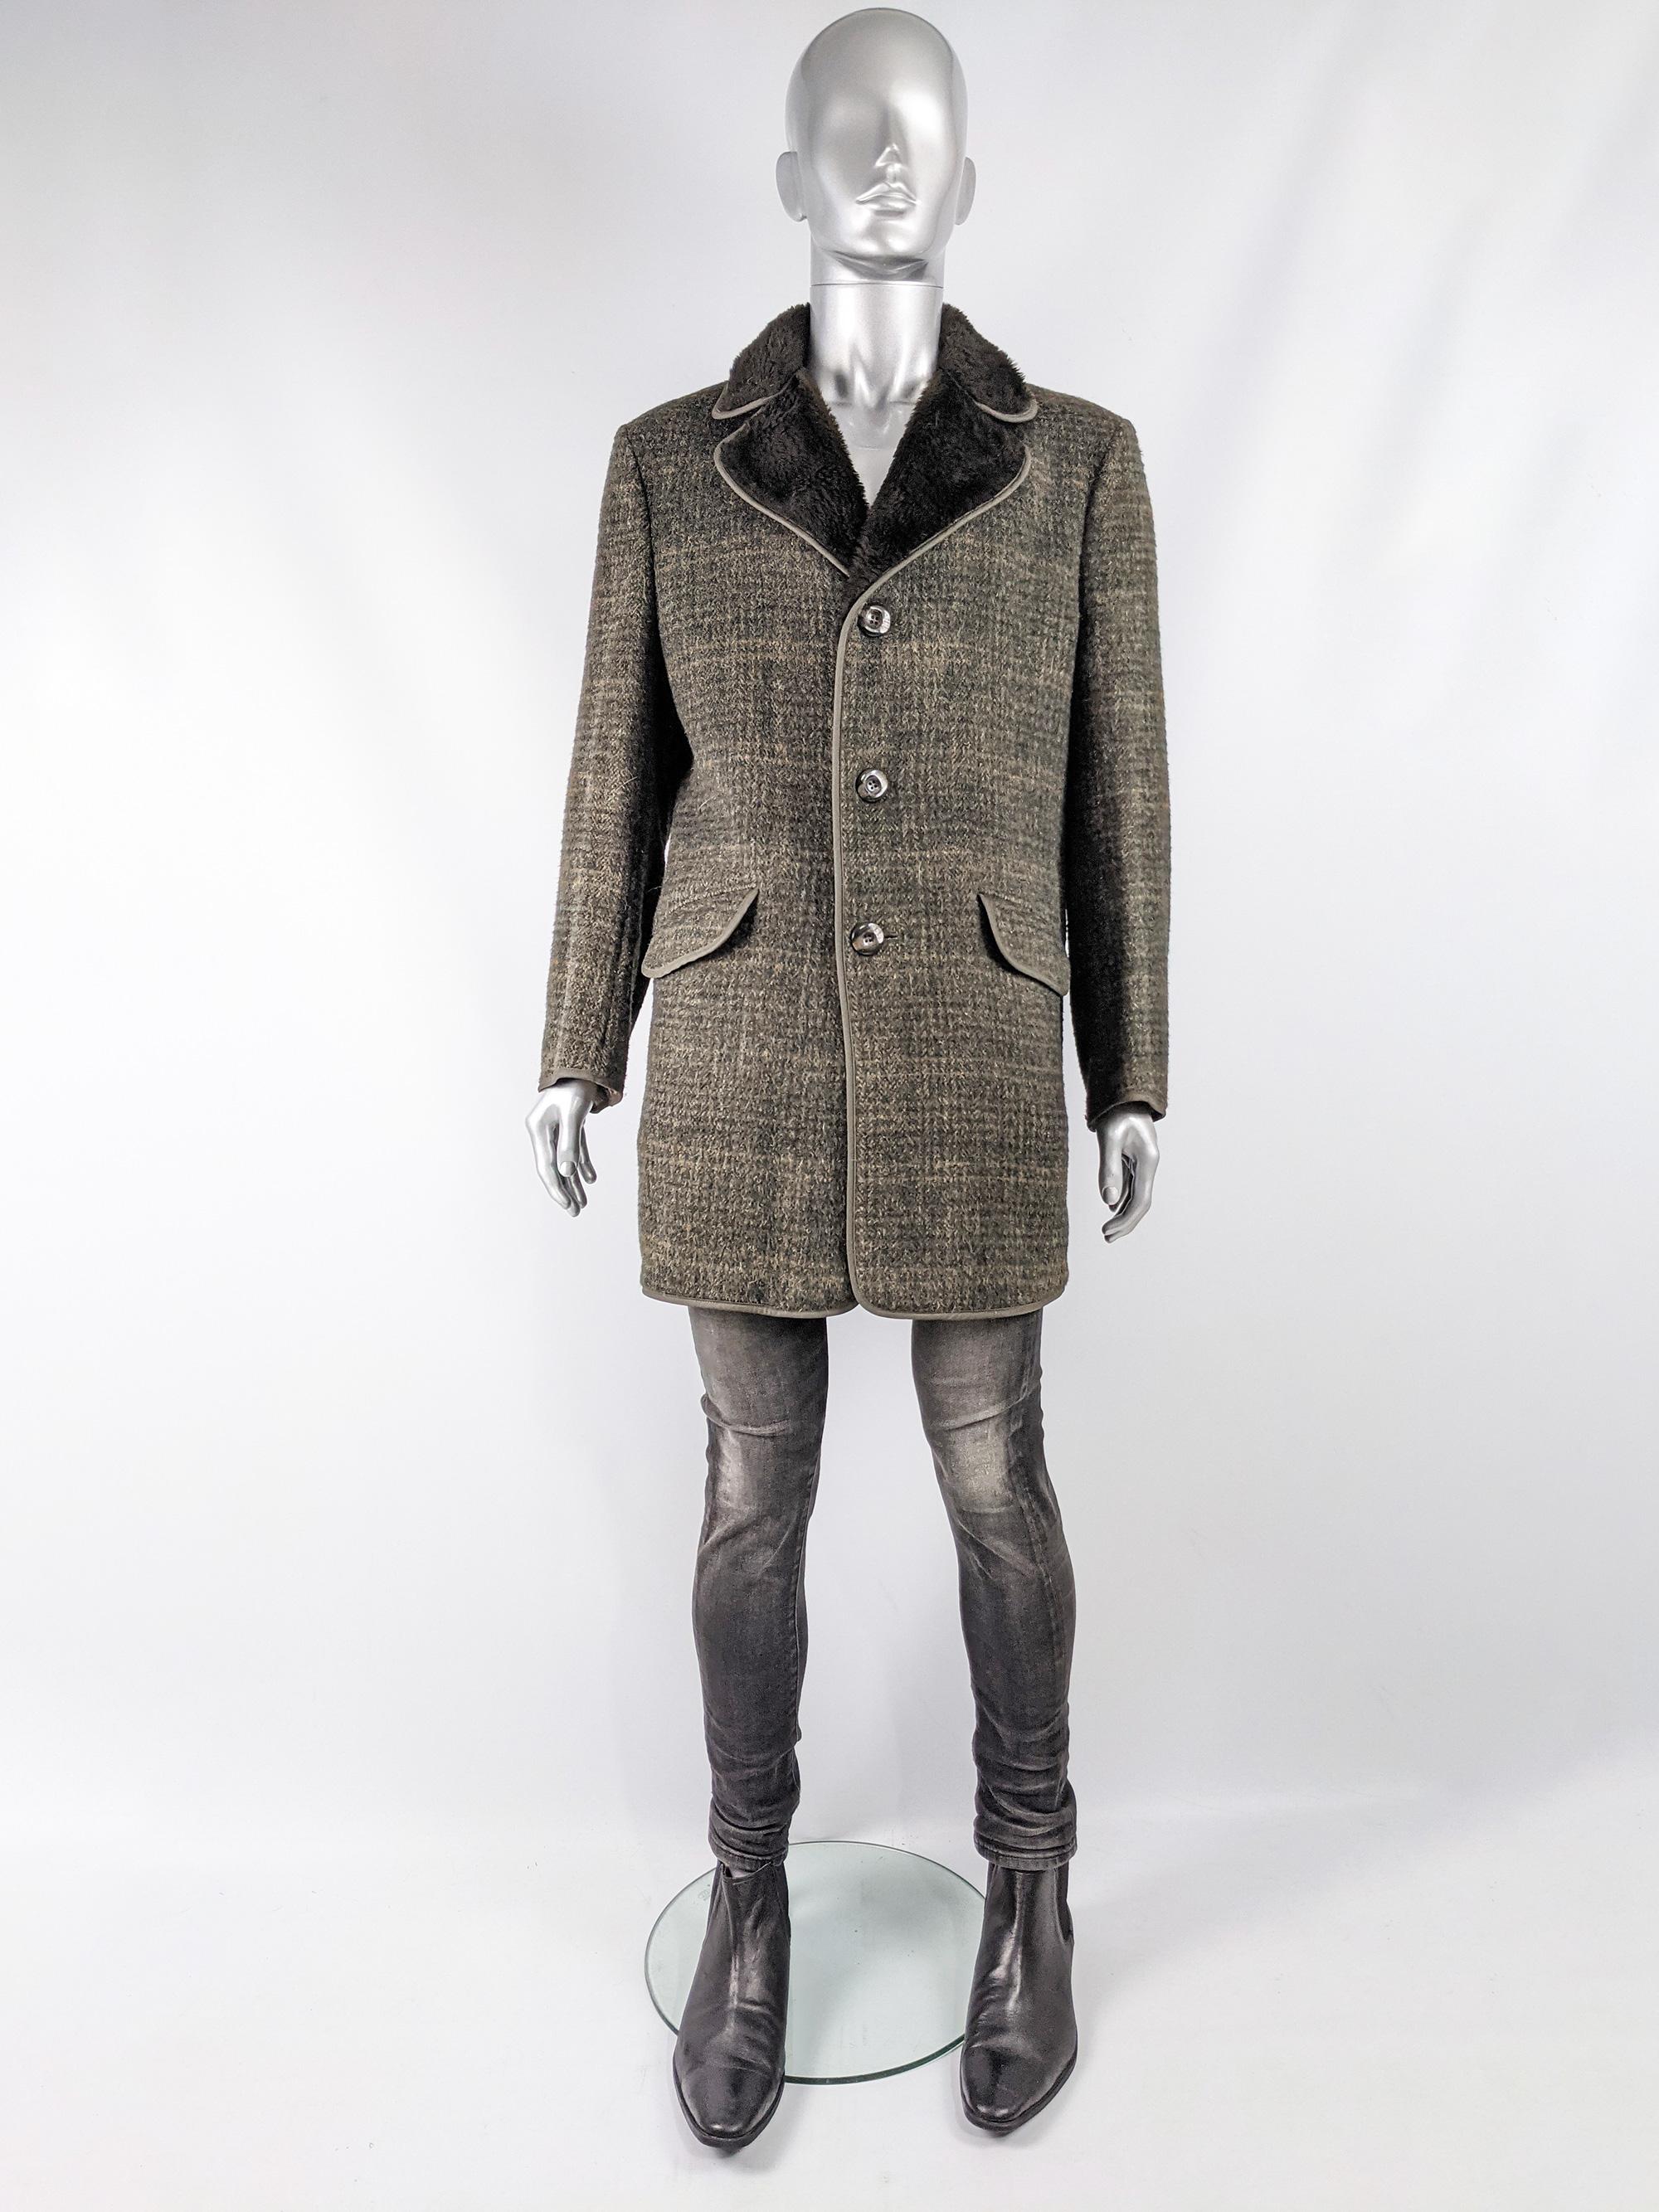 A stylish vintage mens tweed coat from the 70s in a lightweight green wool tweed with a plaid check lining and a brown faux fur collar.

Size: Marked to fit 40